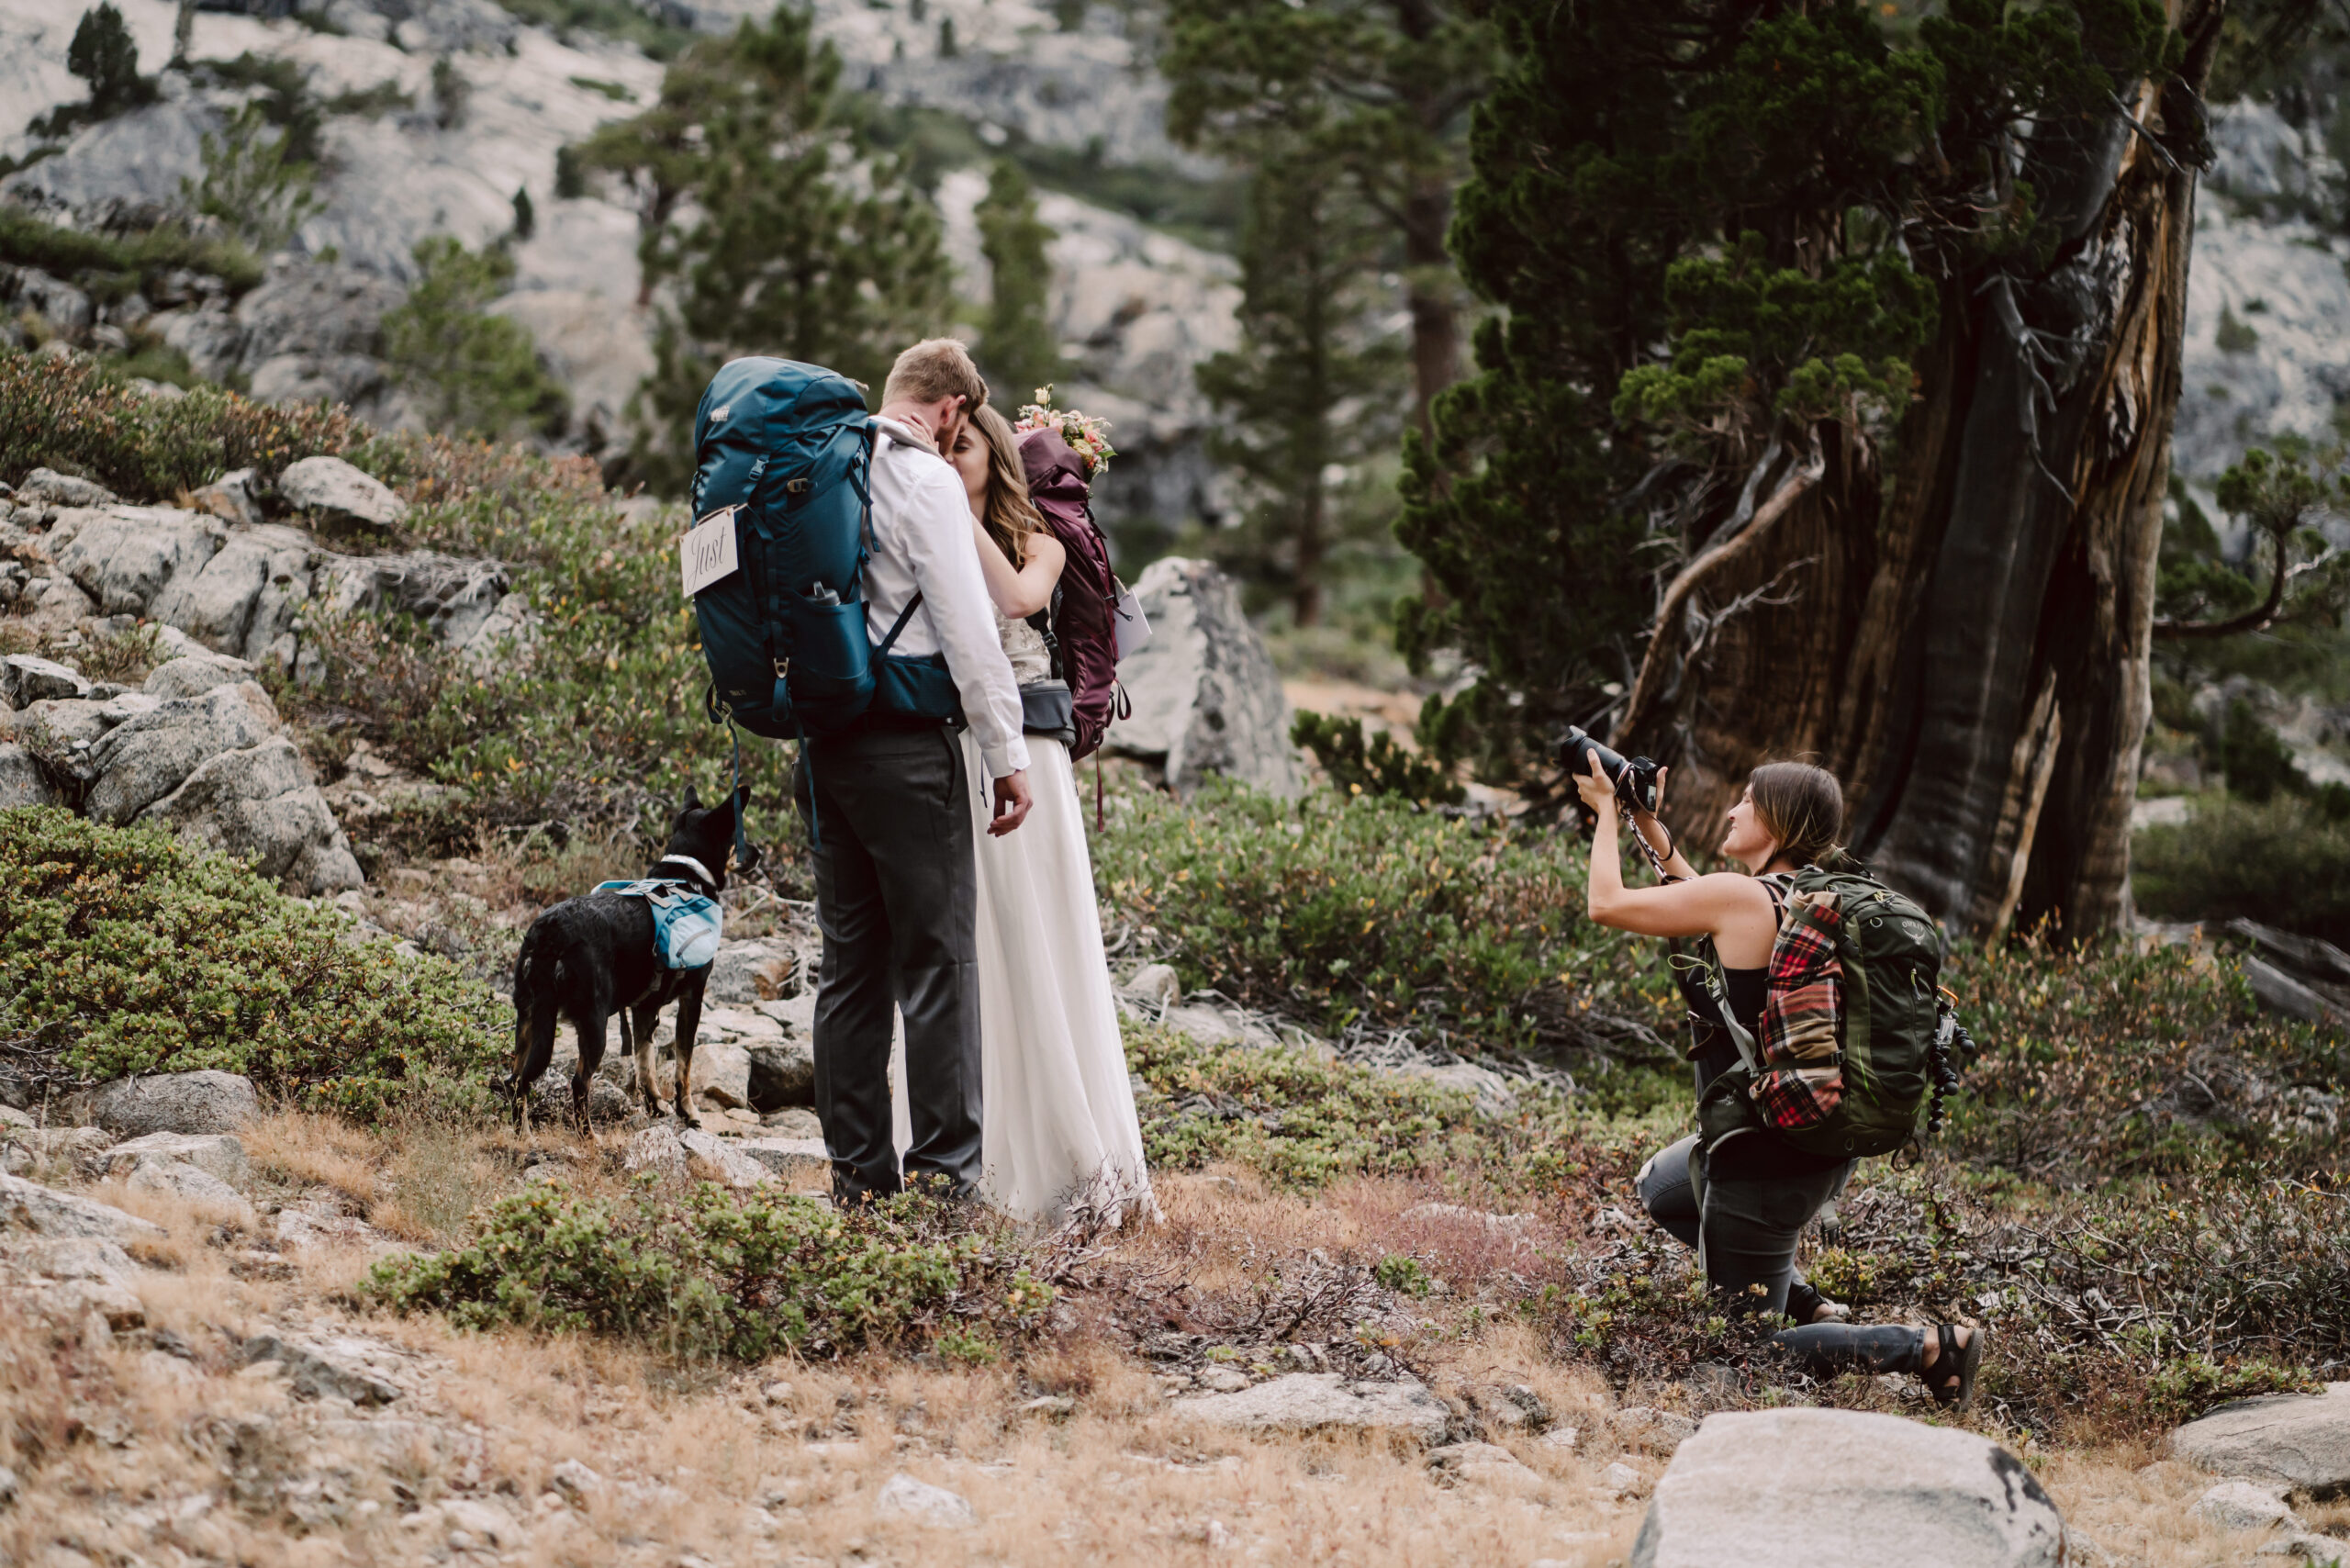 An elopement photographer taking pictures of a elopement couple kissing and wearing hiking backpacks for their adventure elopement